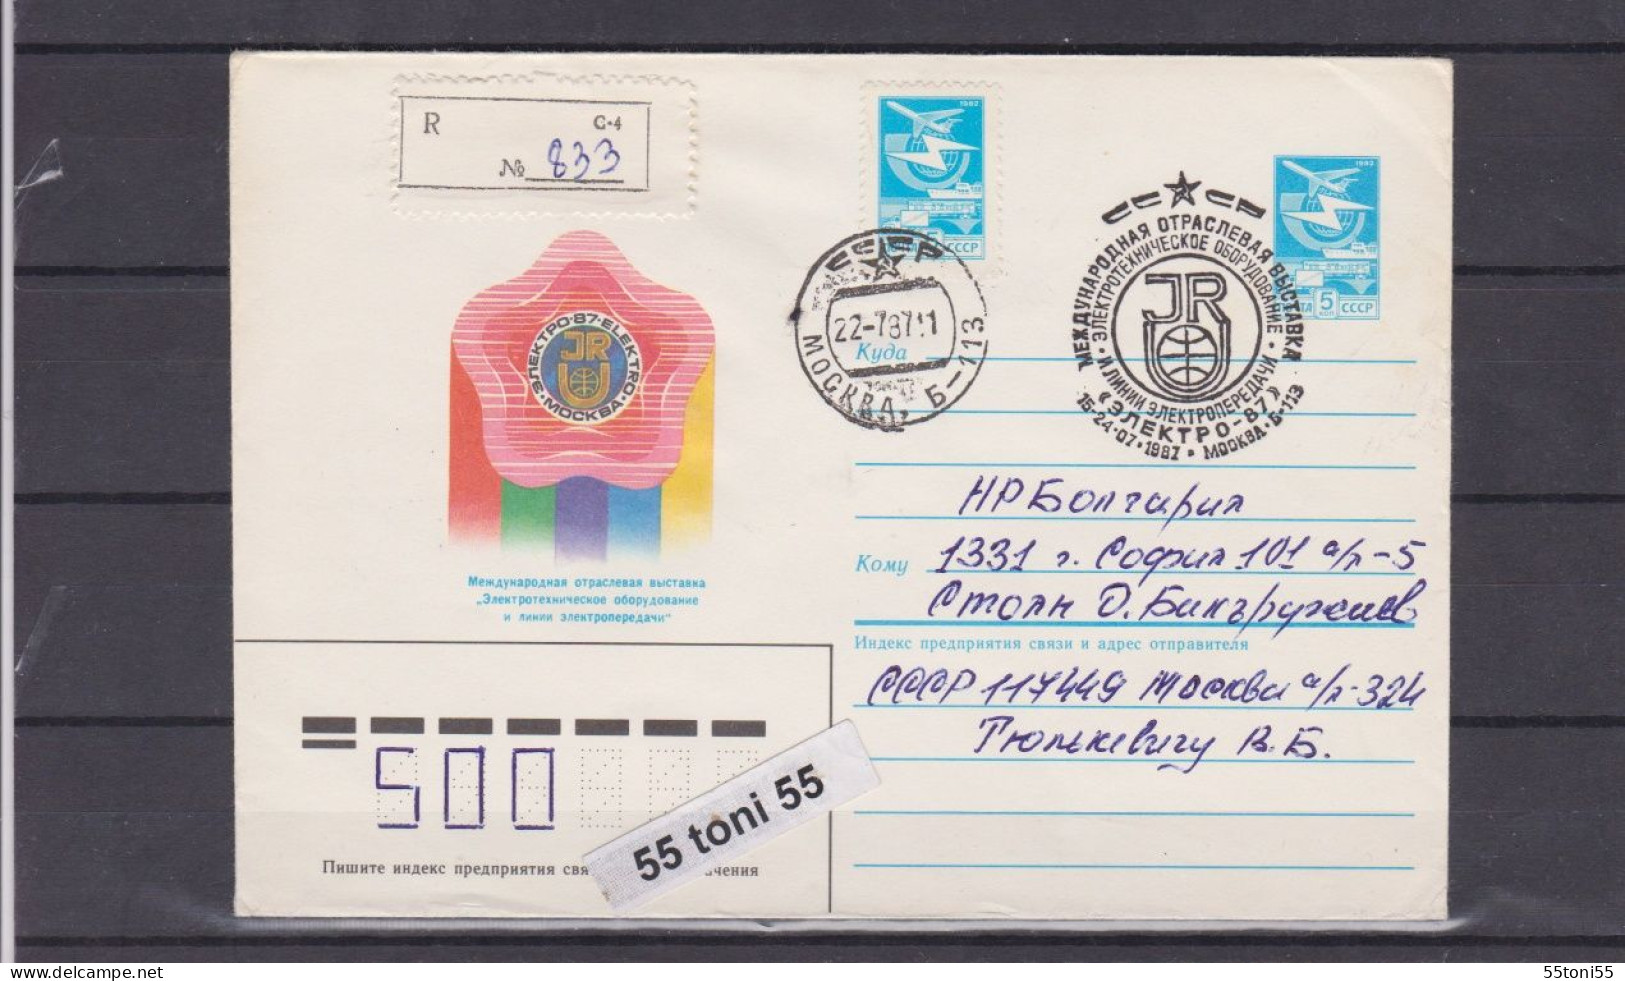 1987  Electro-87 Inter. Exhibition Of Electrotechnical Equipment  P.Stationery + Special Cancel USSR P.Stationery Travel - Elektriciteit